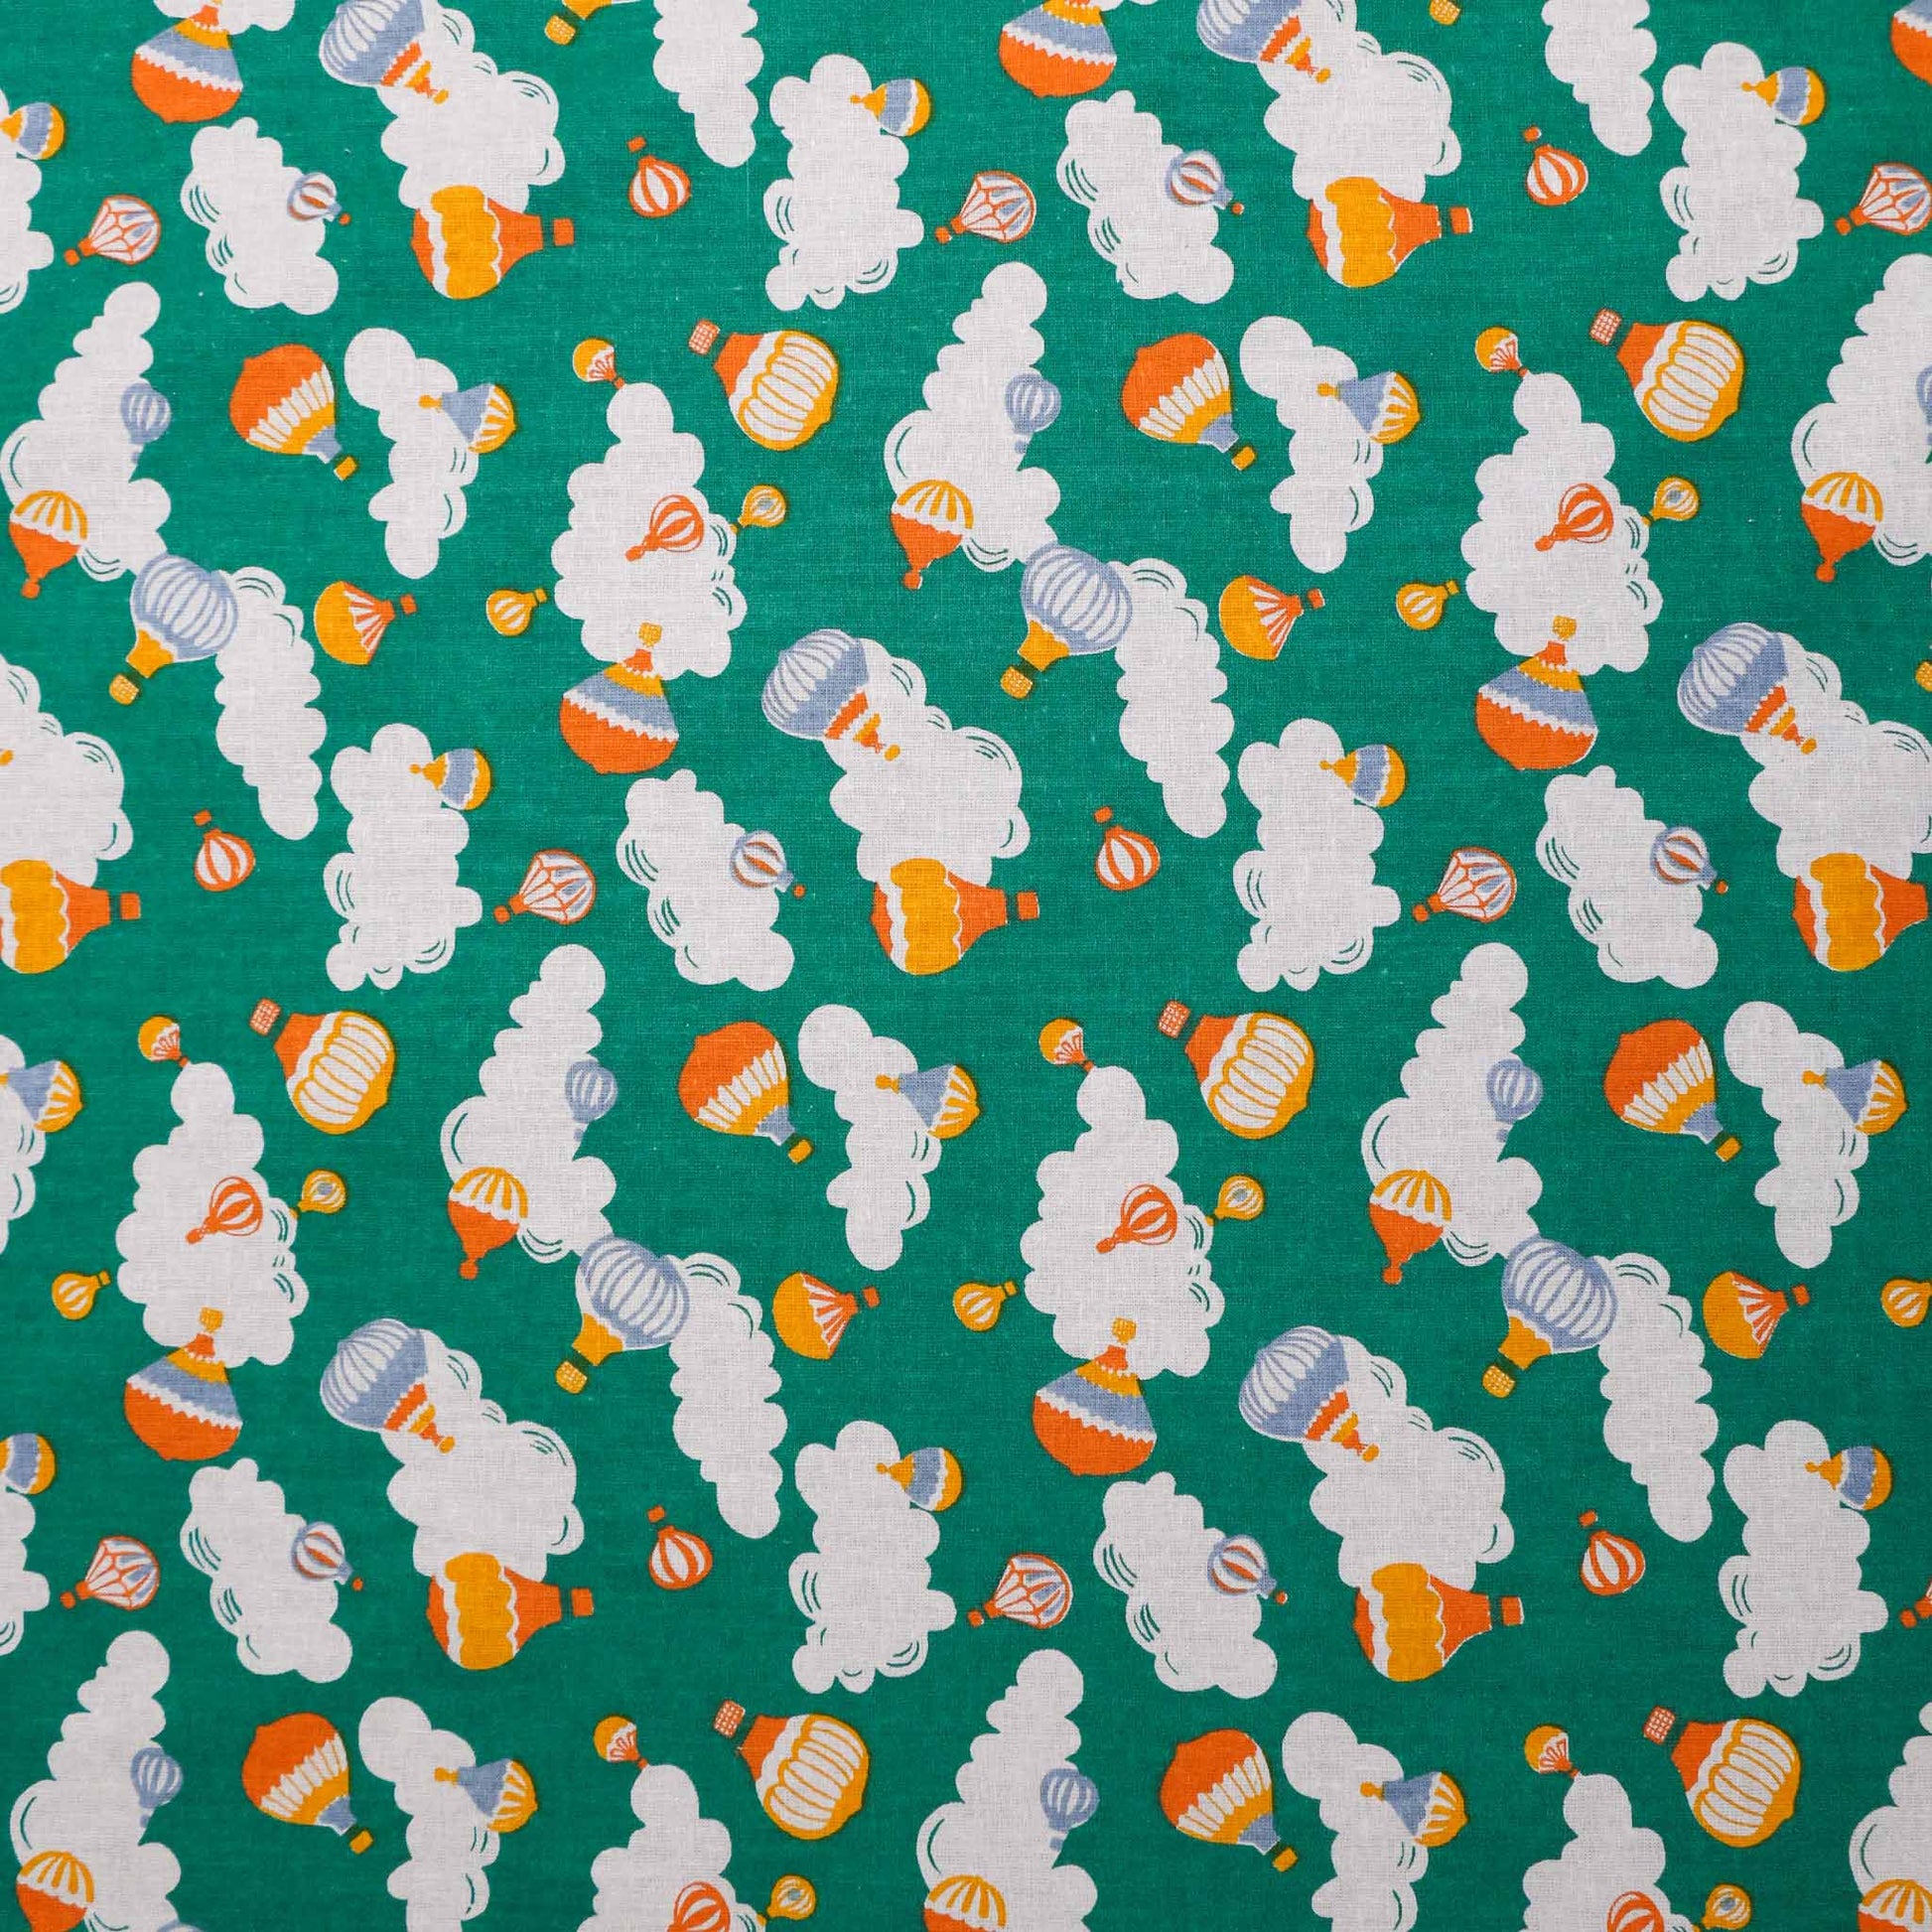 green retro sustainable cotton poplin dress fabric with printed hot air balloon clouds pattern